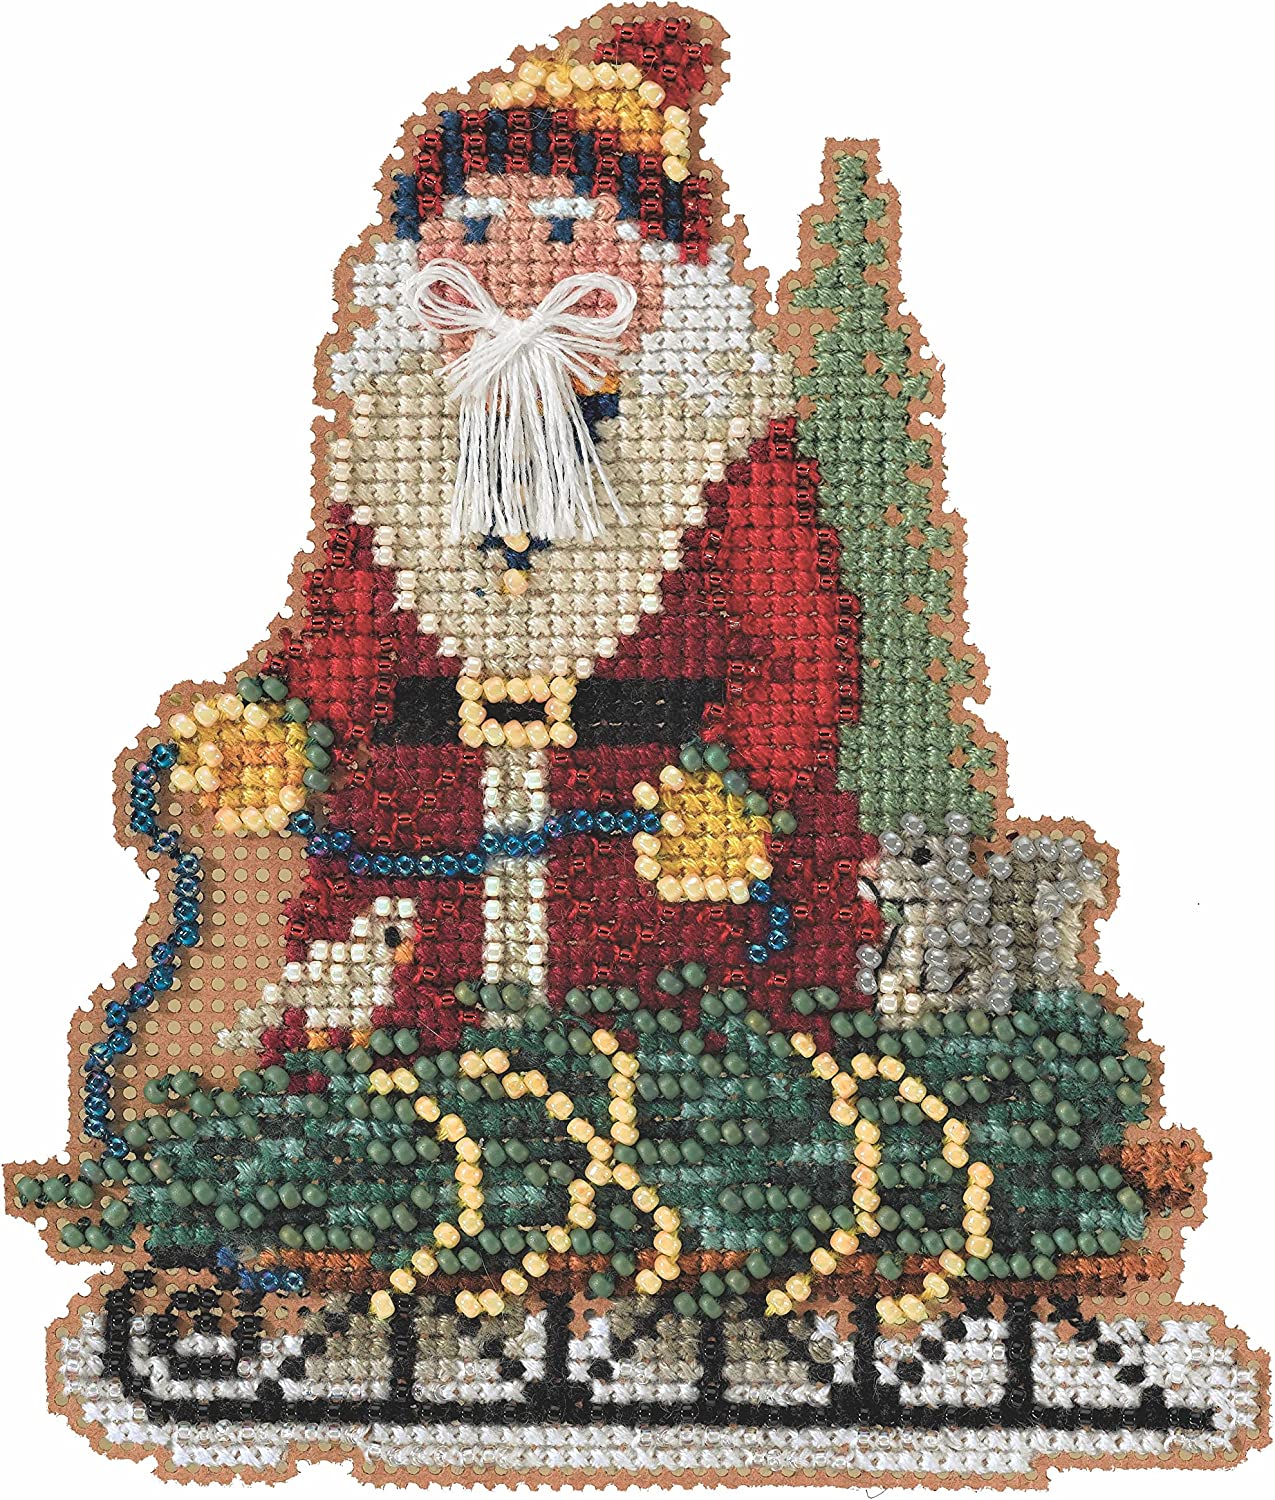 Timberline Norway Spruce Santa counted cross stitch kit